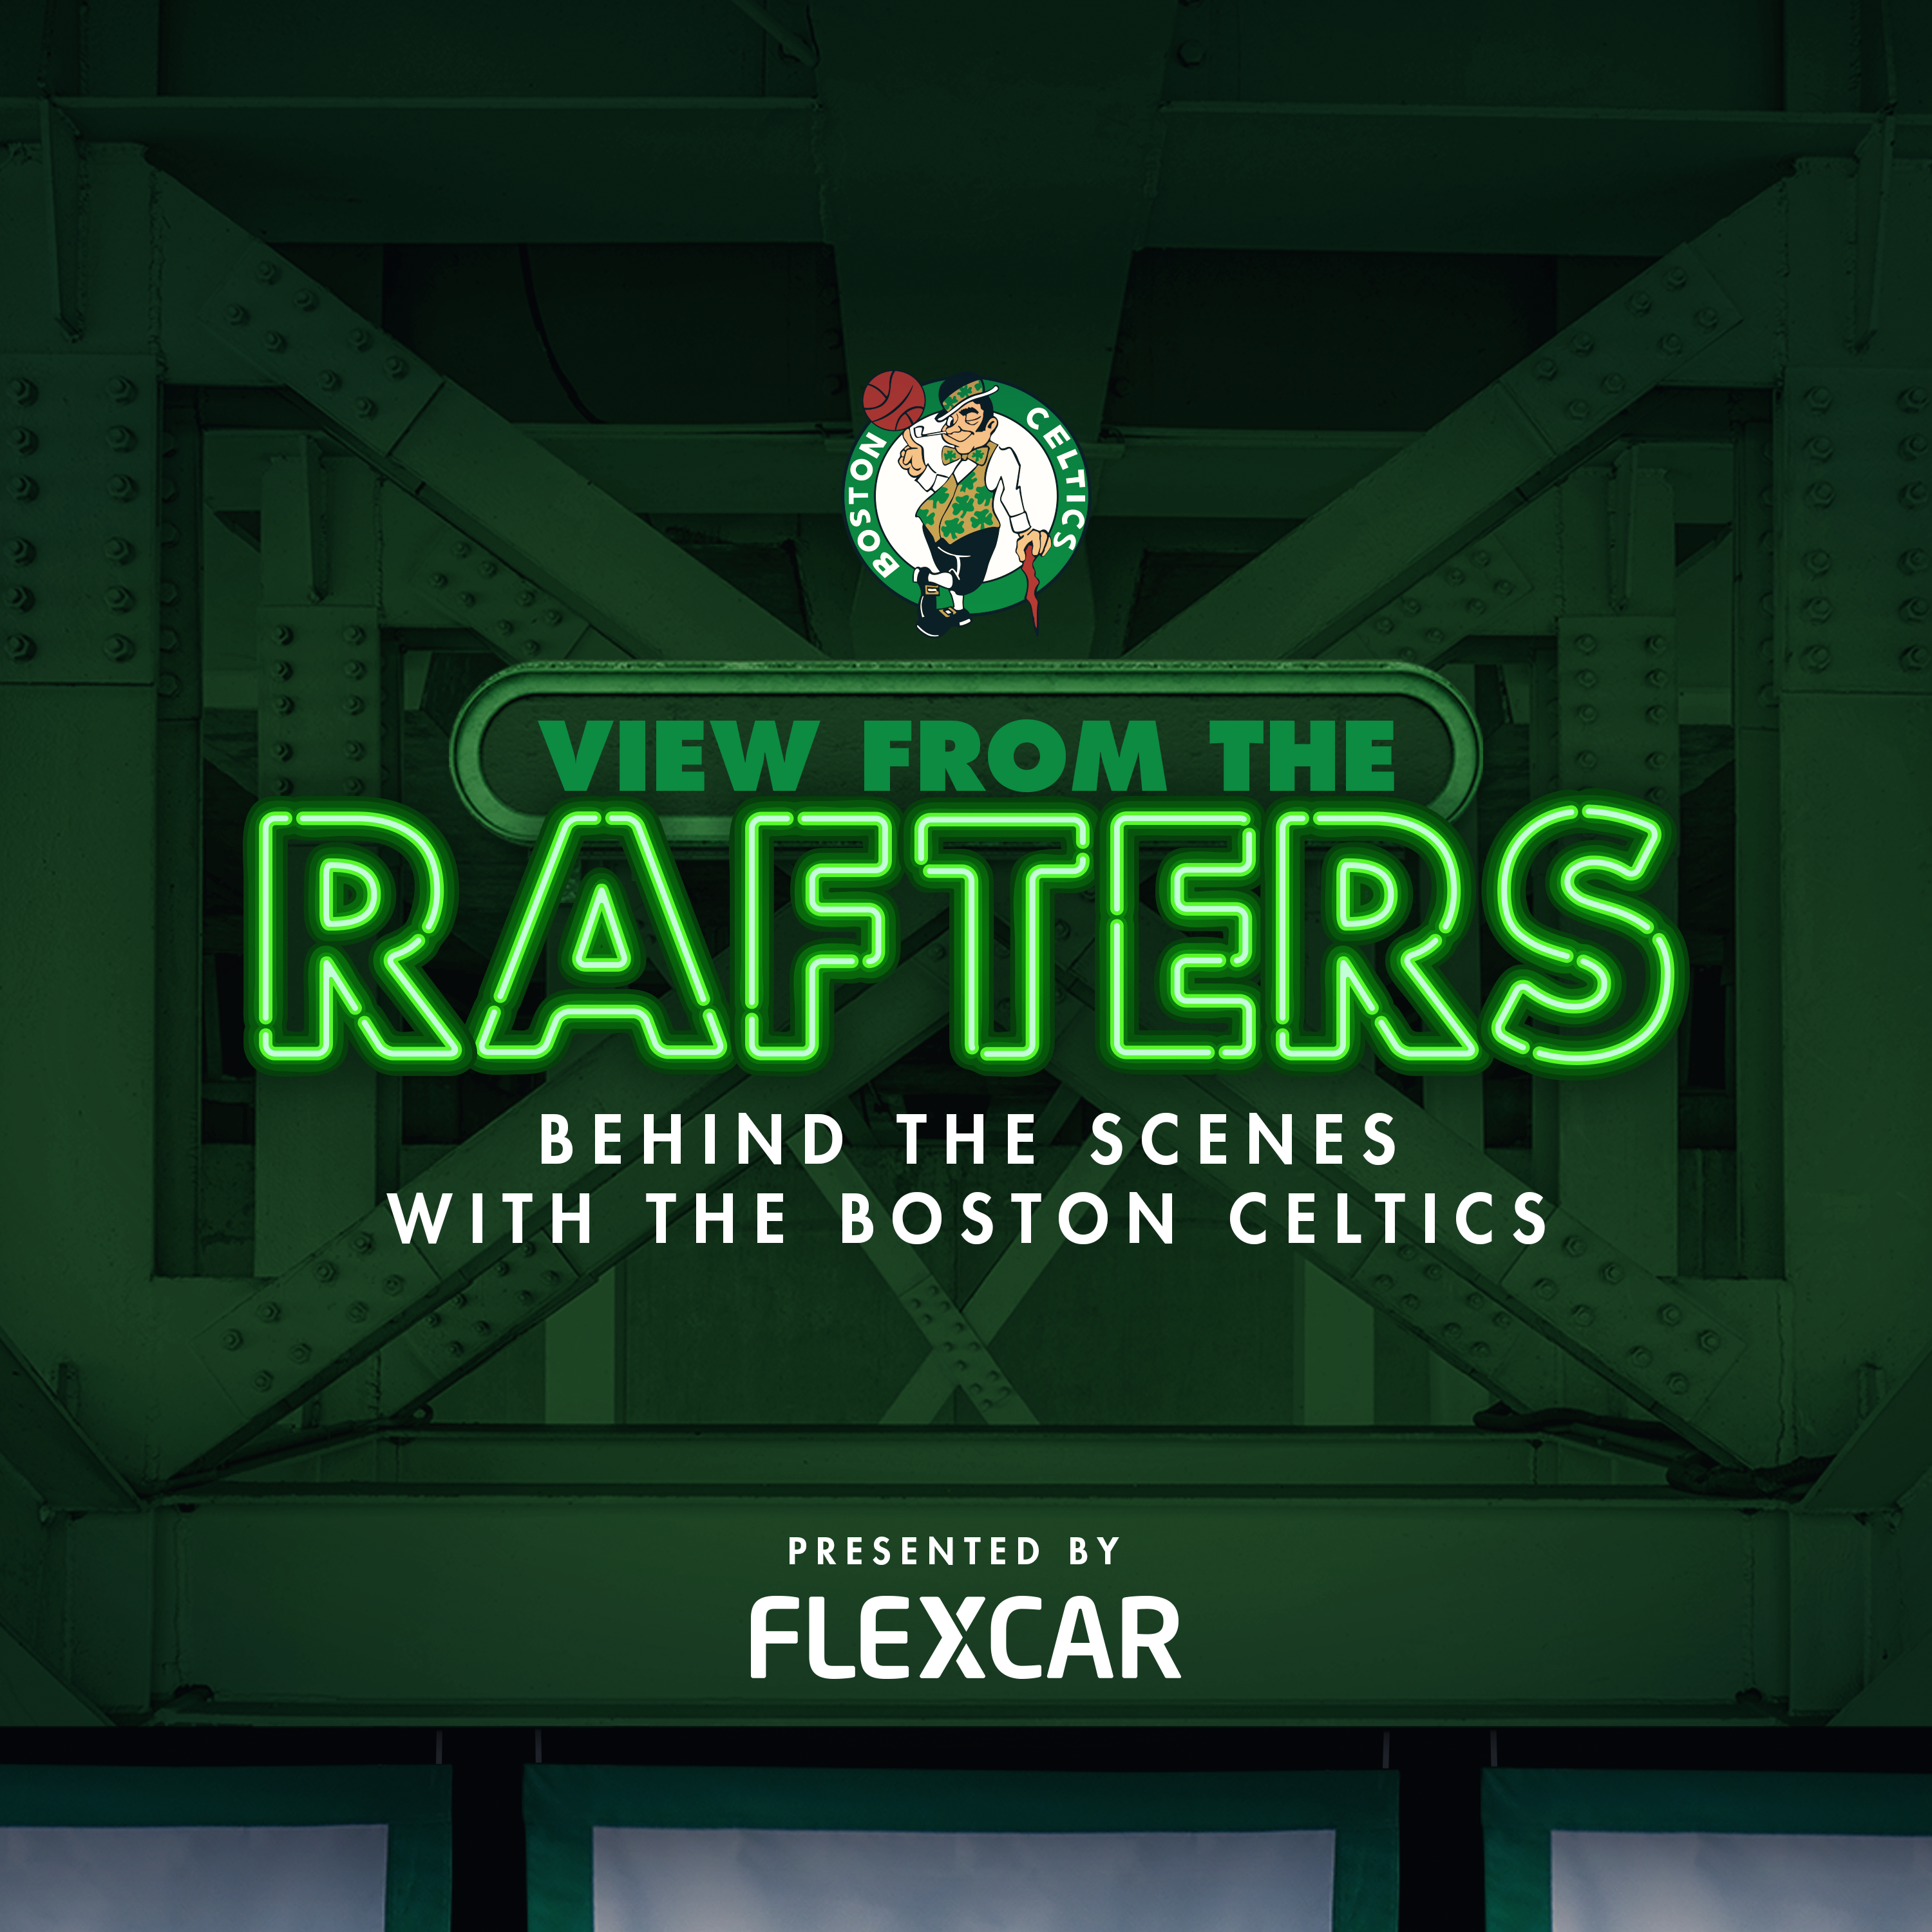 SOUND OFF: Another Blowout Win for Celtics While Jayson Tatum, Jrue Holiday, Al Horford All Rest